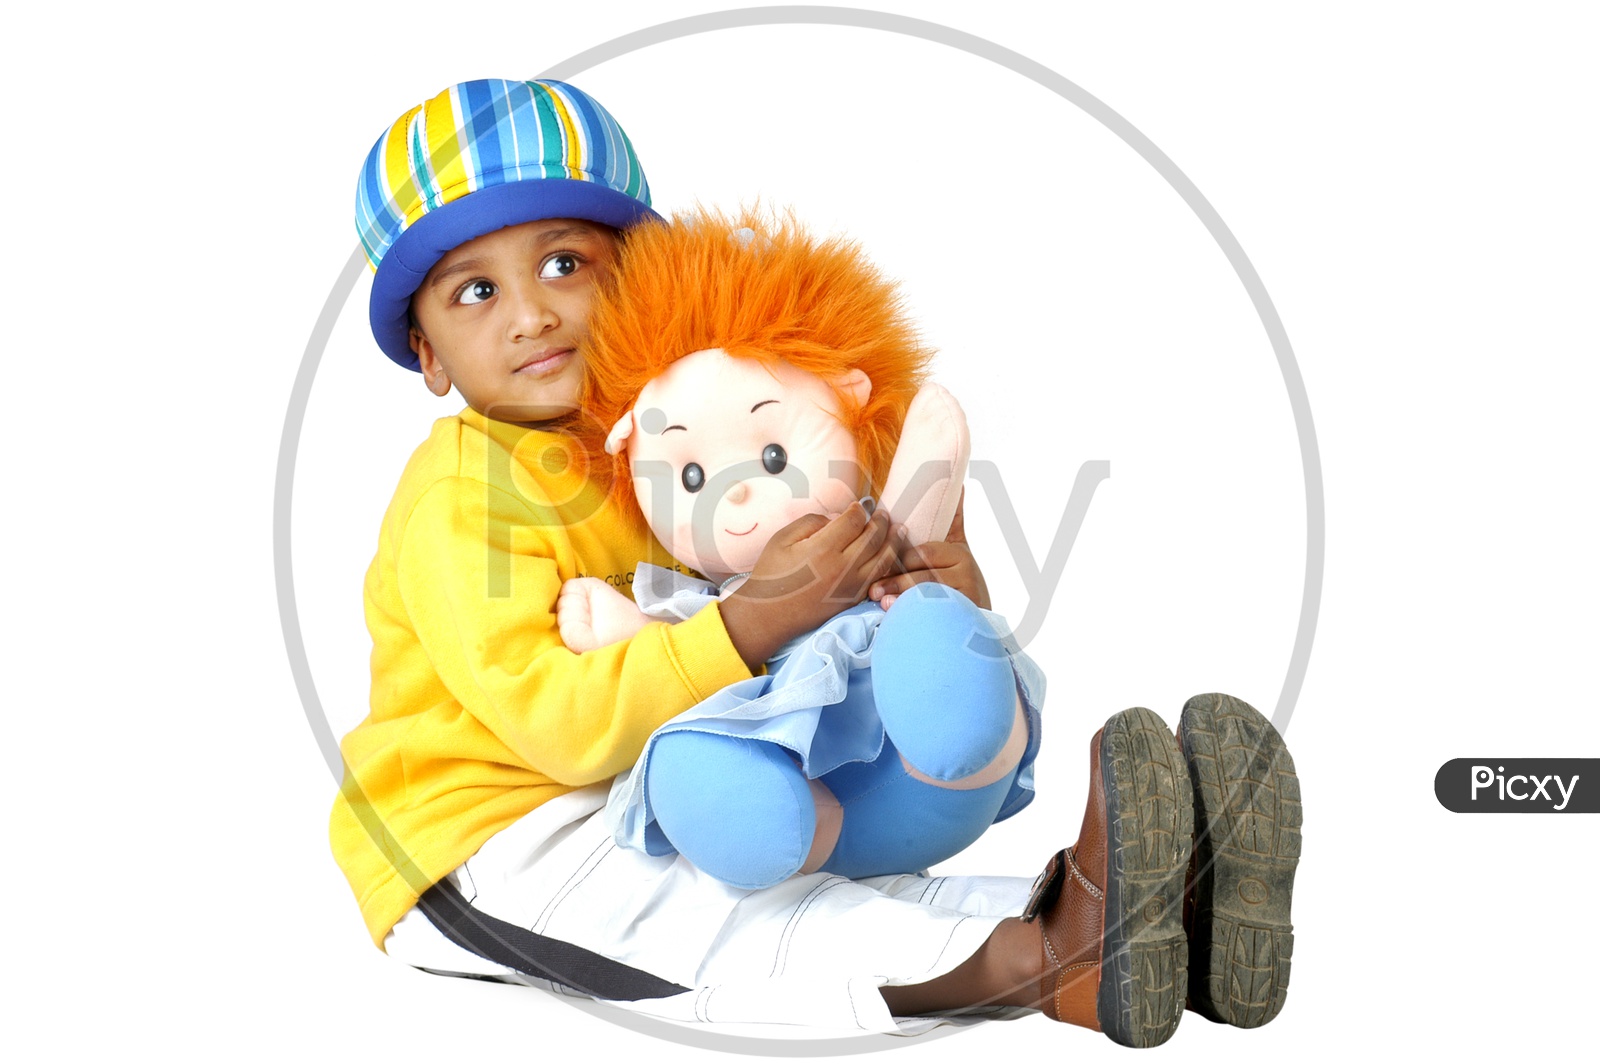 Indian boy wearing yellow t-shirt playing with toys